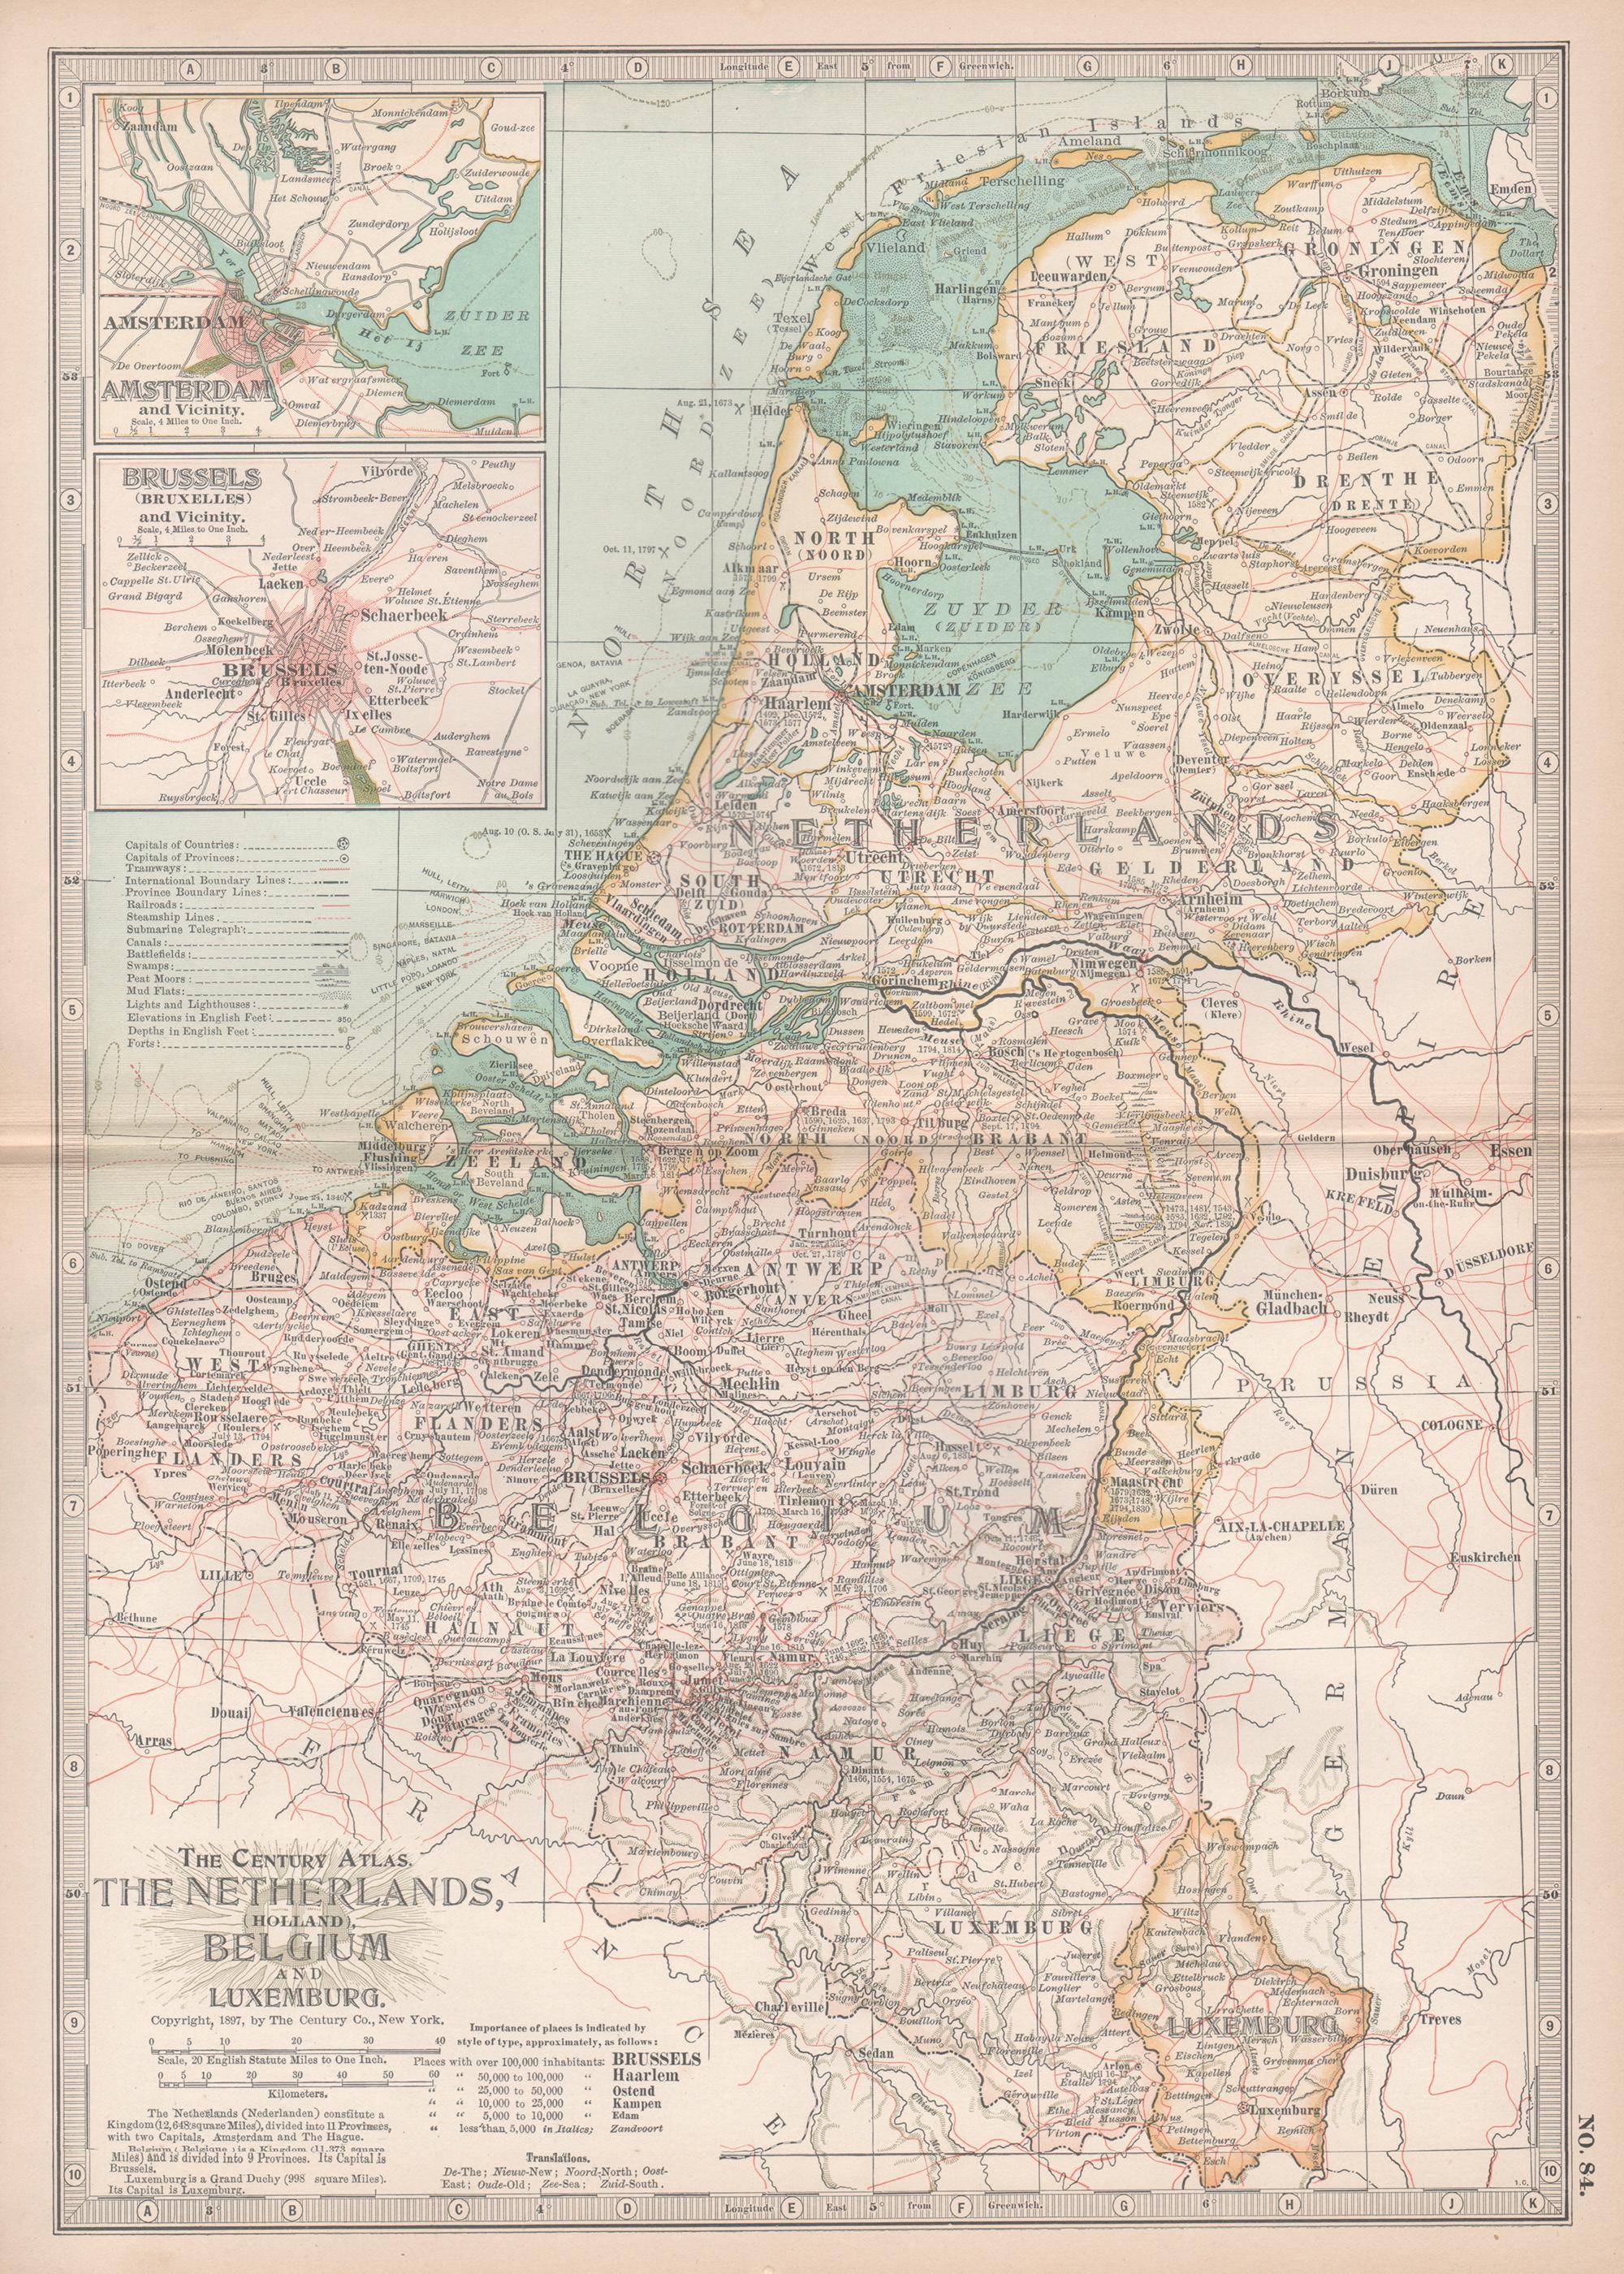 Unknown Print - The Netherlands (Holland), Belgium and Luxemburg. Century Atlas antique map